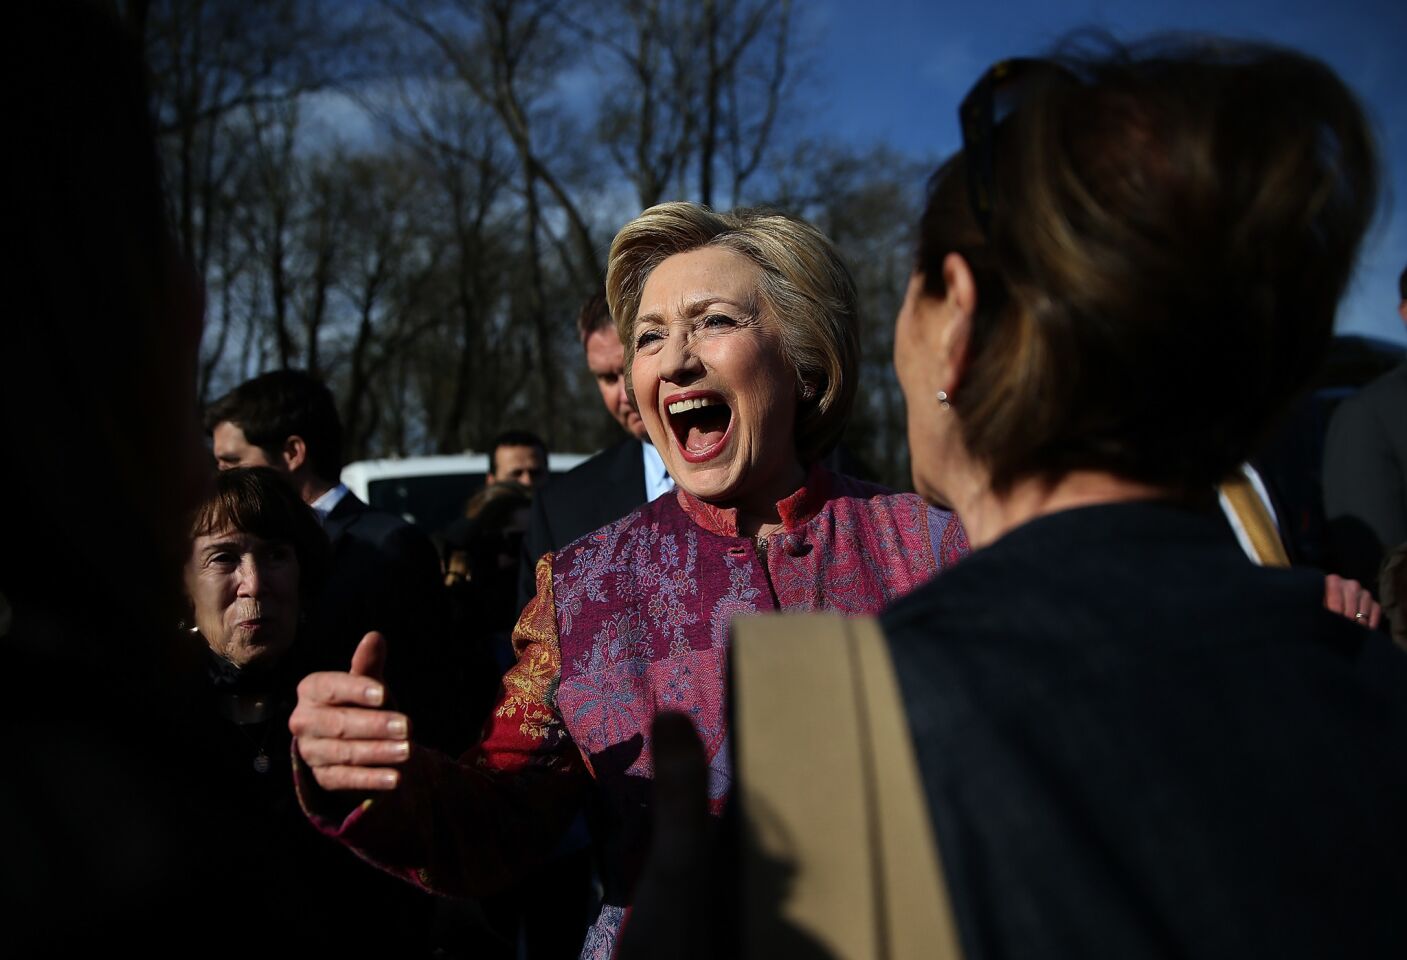 Hillary Clinton greets supporters outside a polling station in Chappaqua, N.Y.